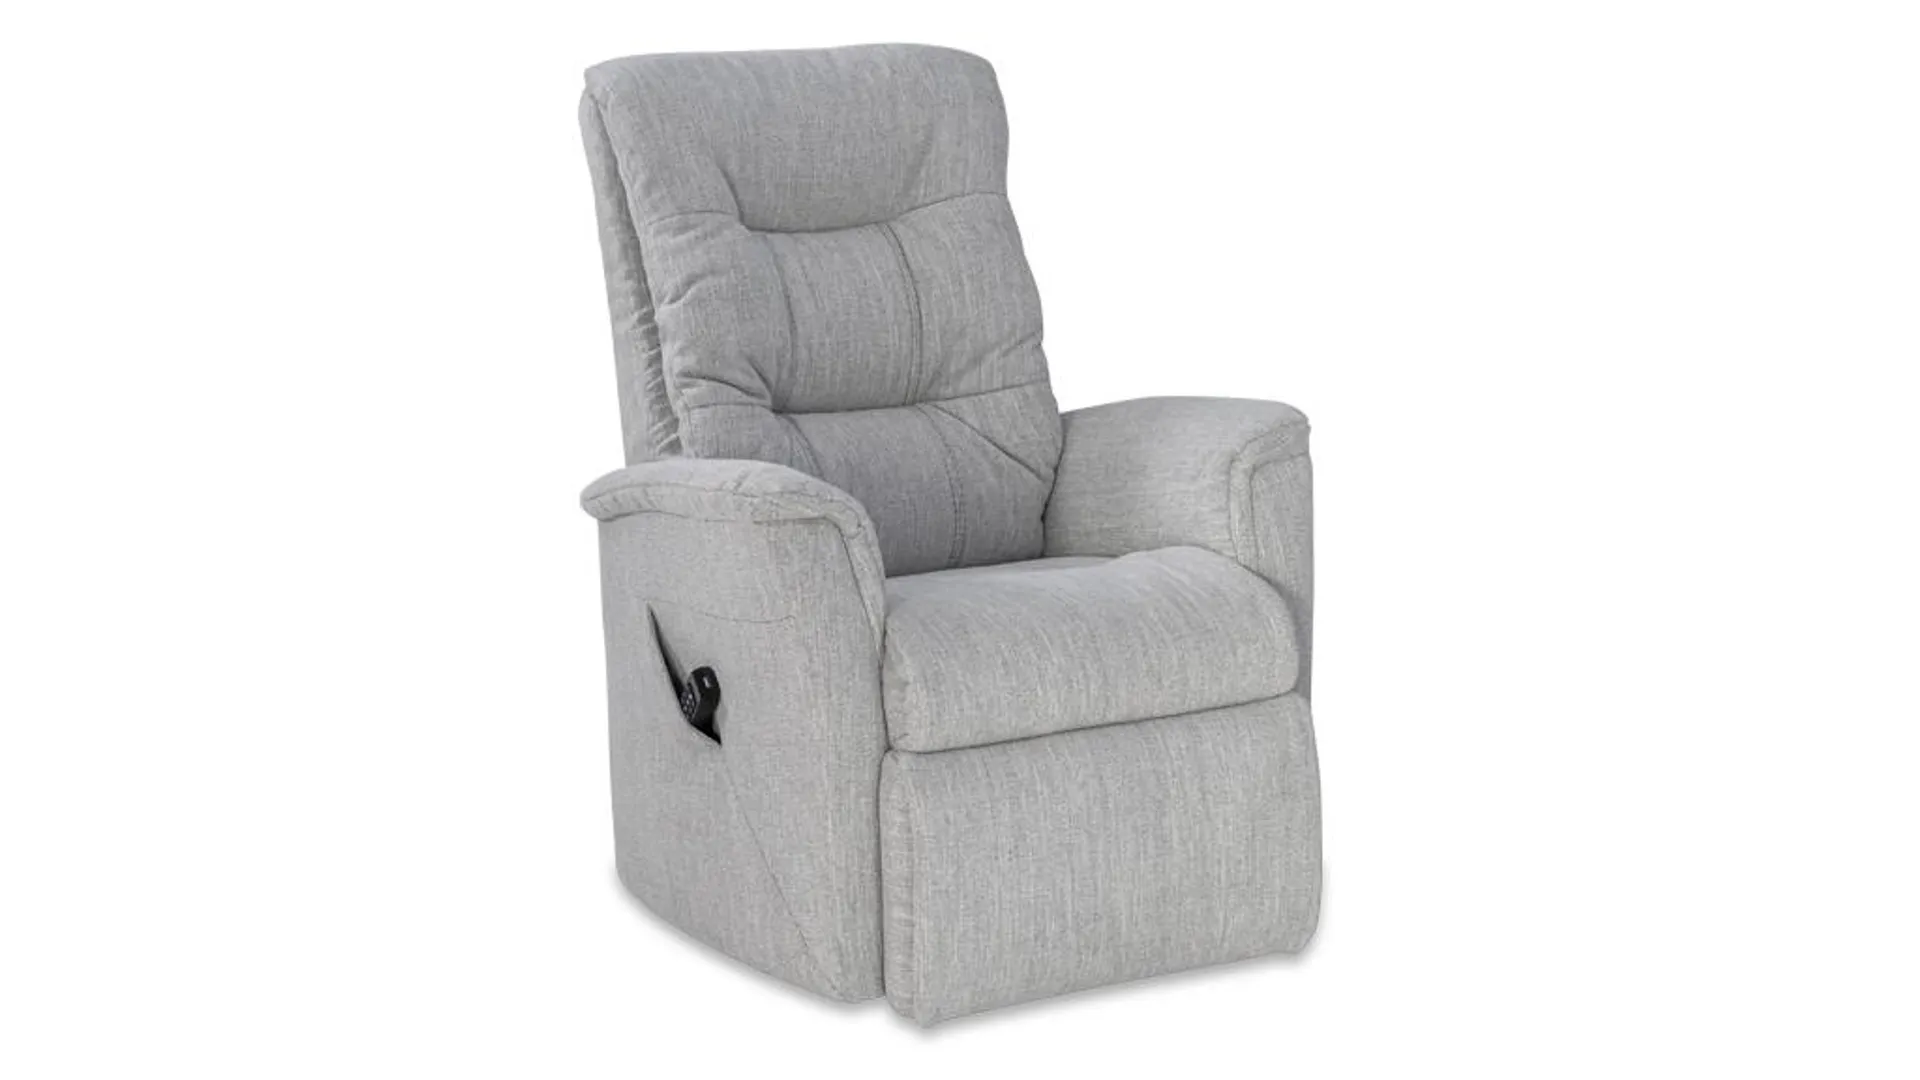 Lift Electric Recliner Chair